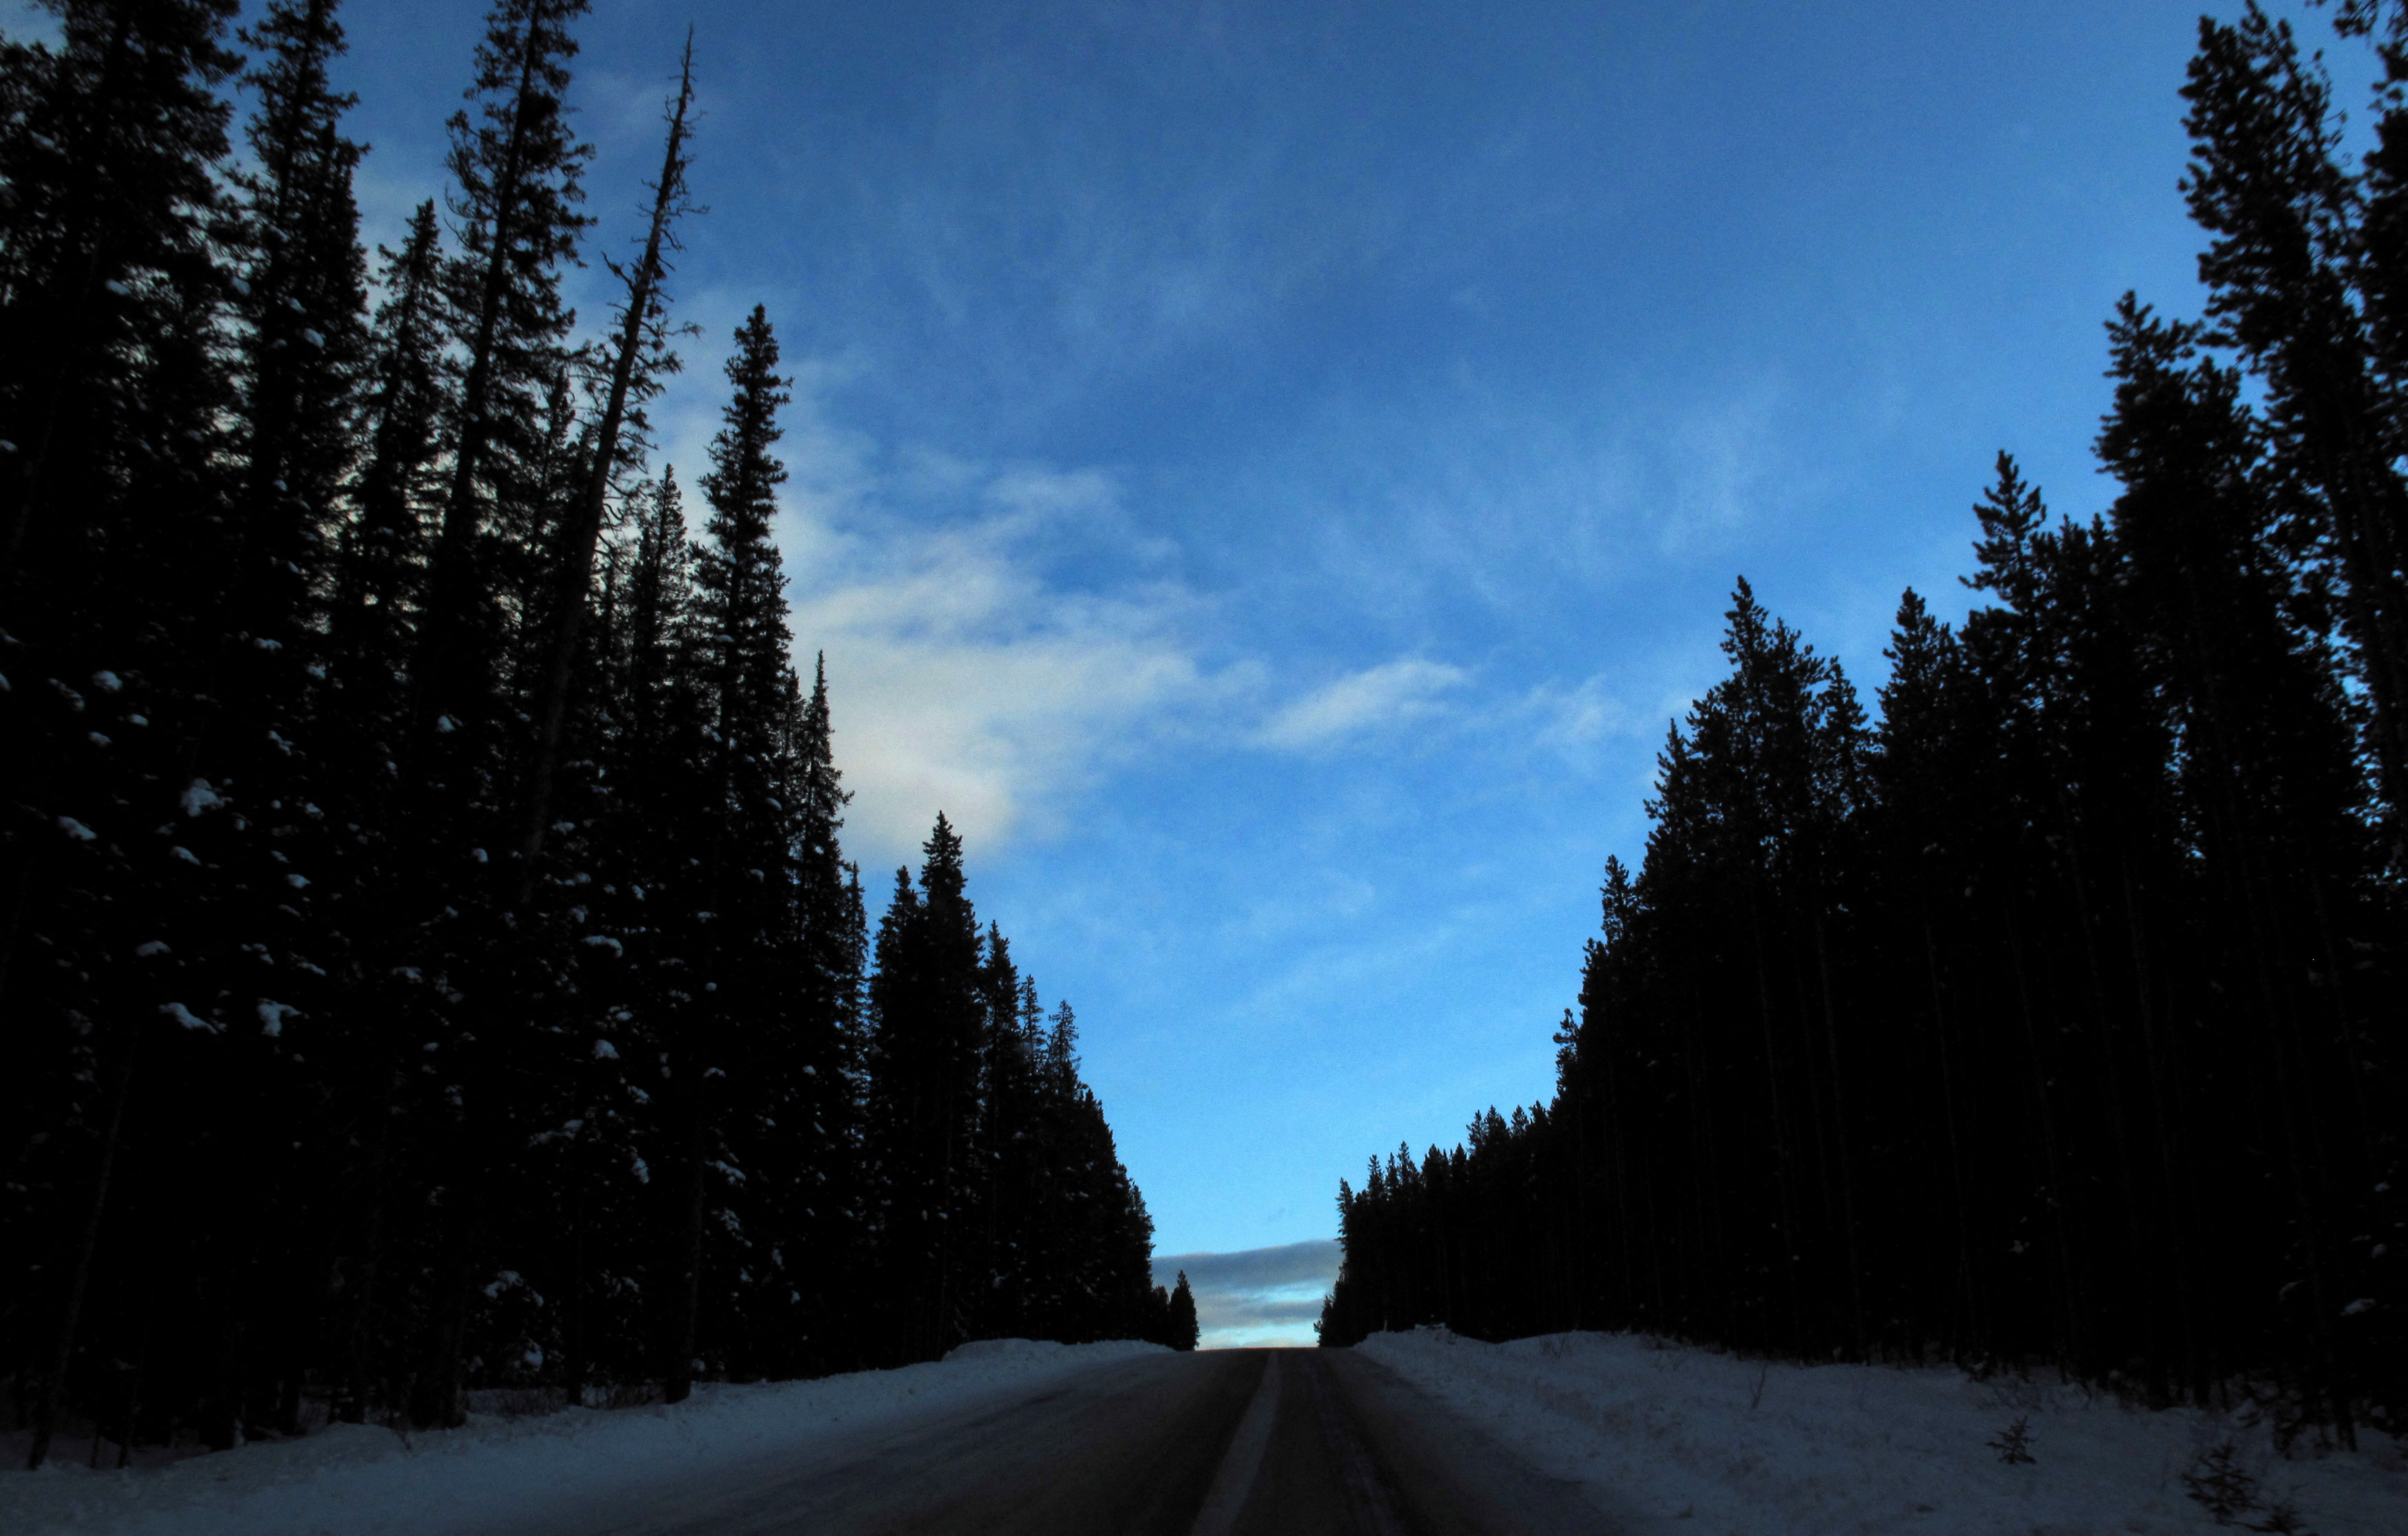 A snow covered road leads up a hill at dusk in Banff National Park near Lake Louise, Alberta